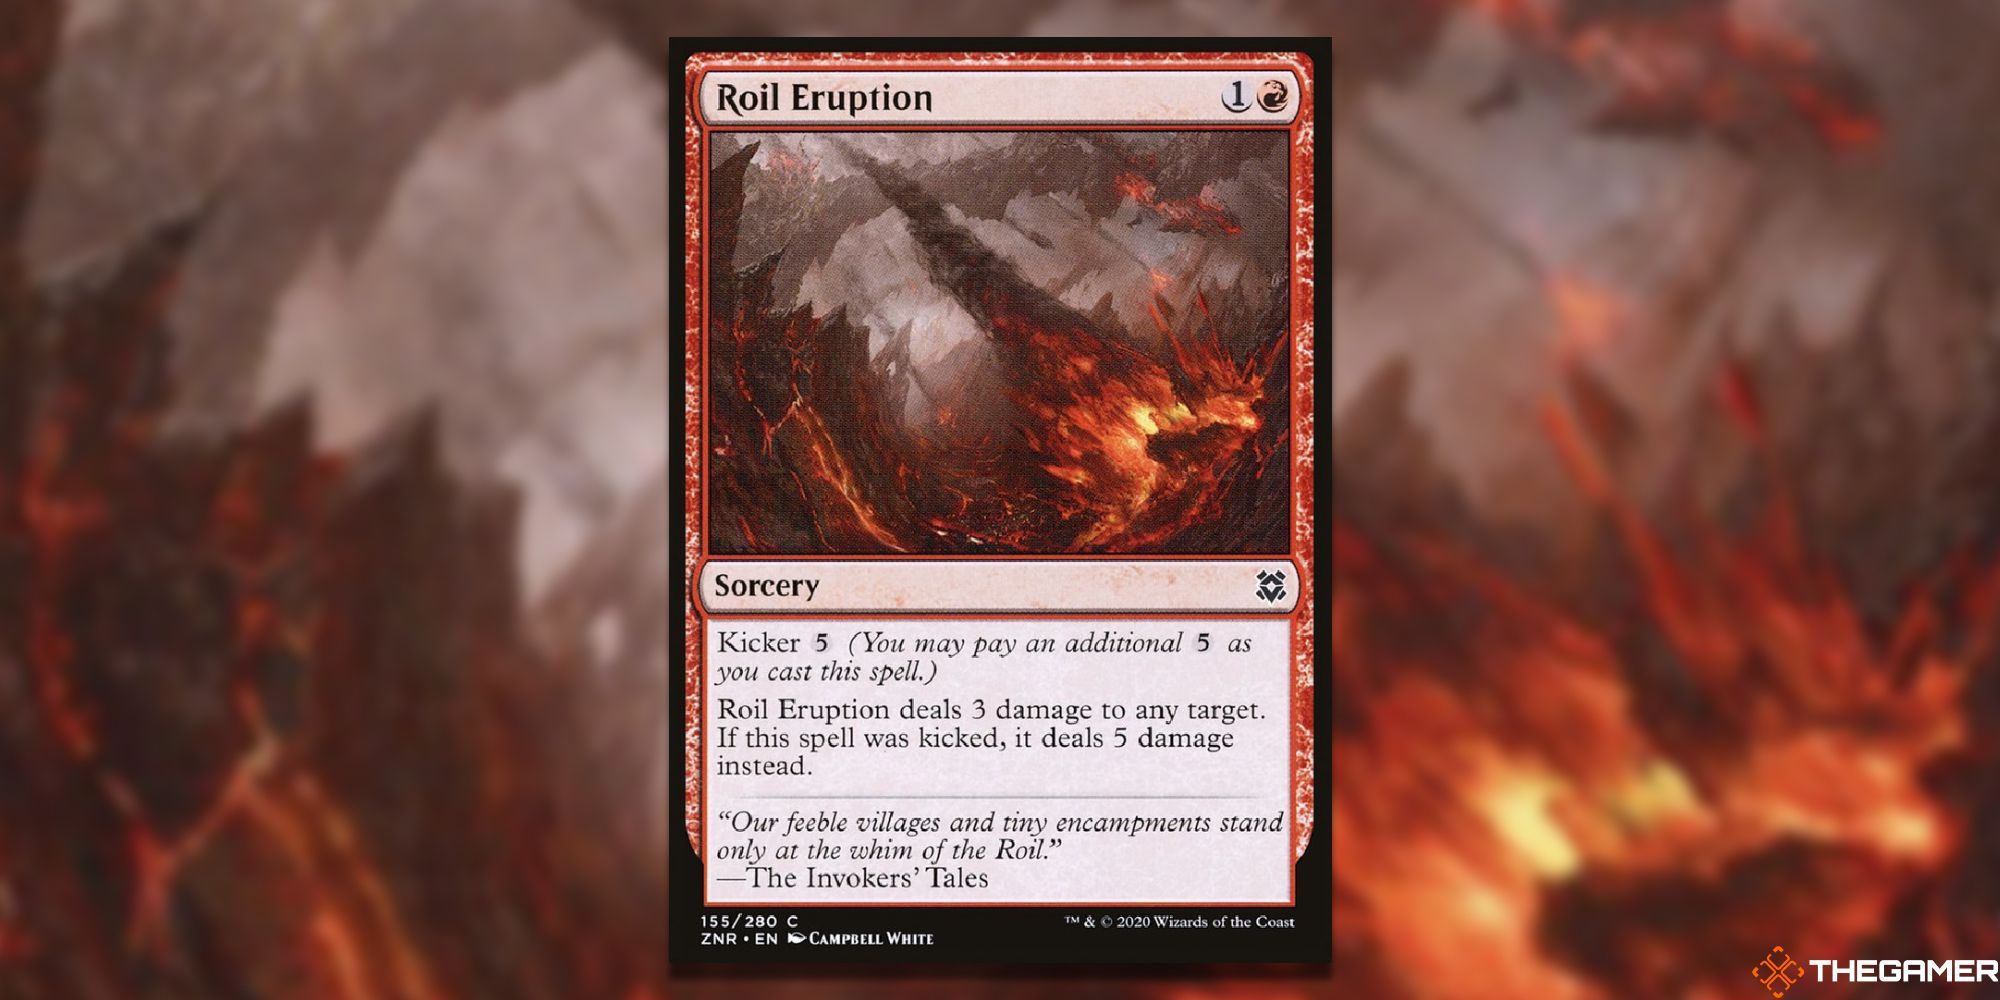 Magic: The Gathering Roil Eruption full card with background